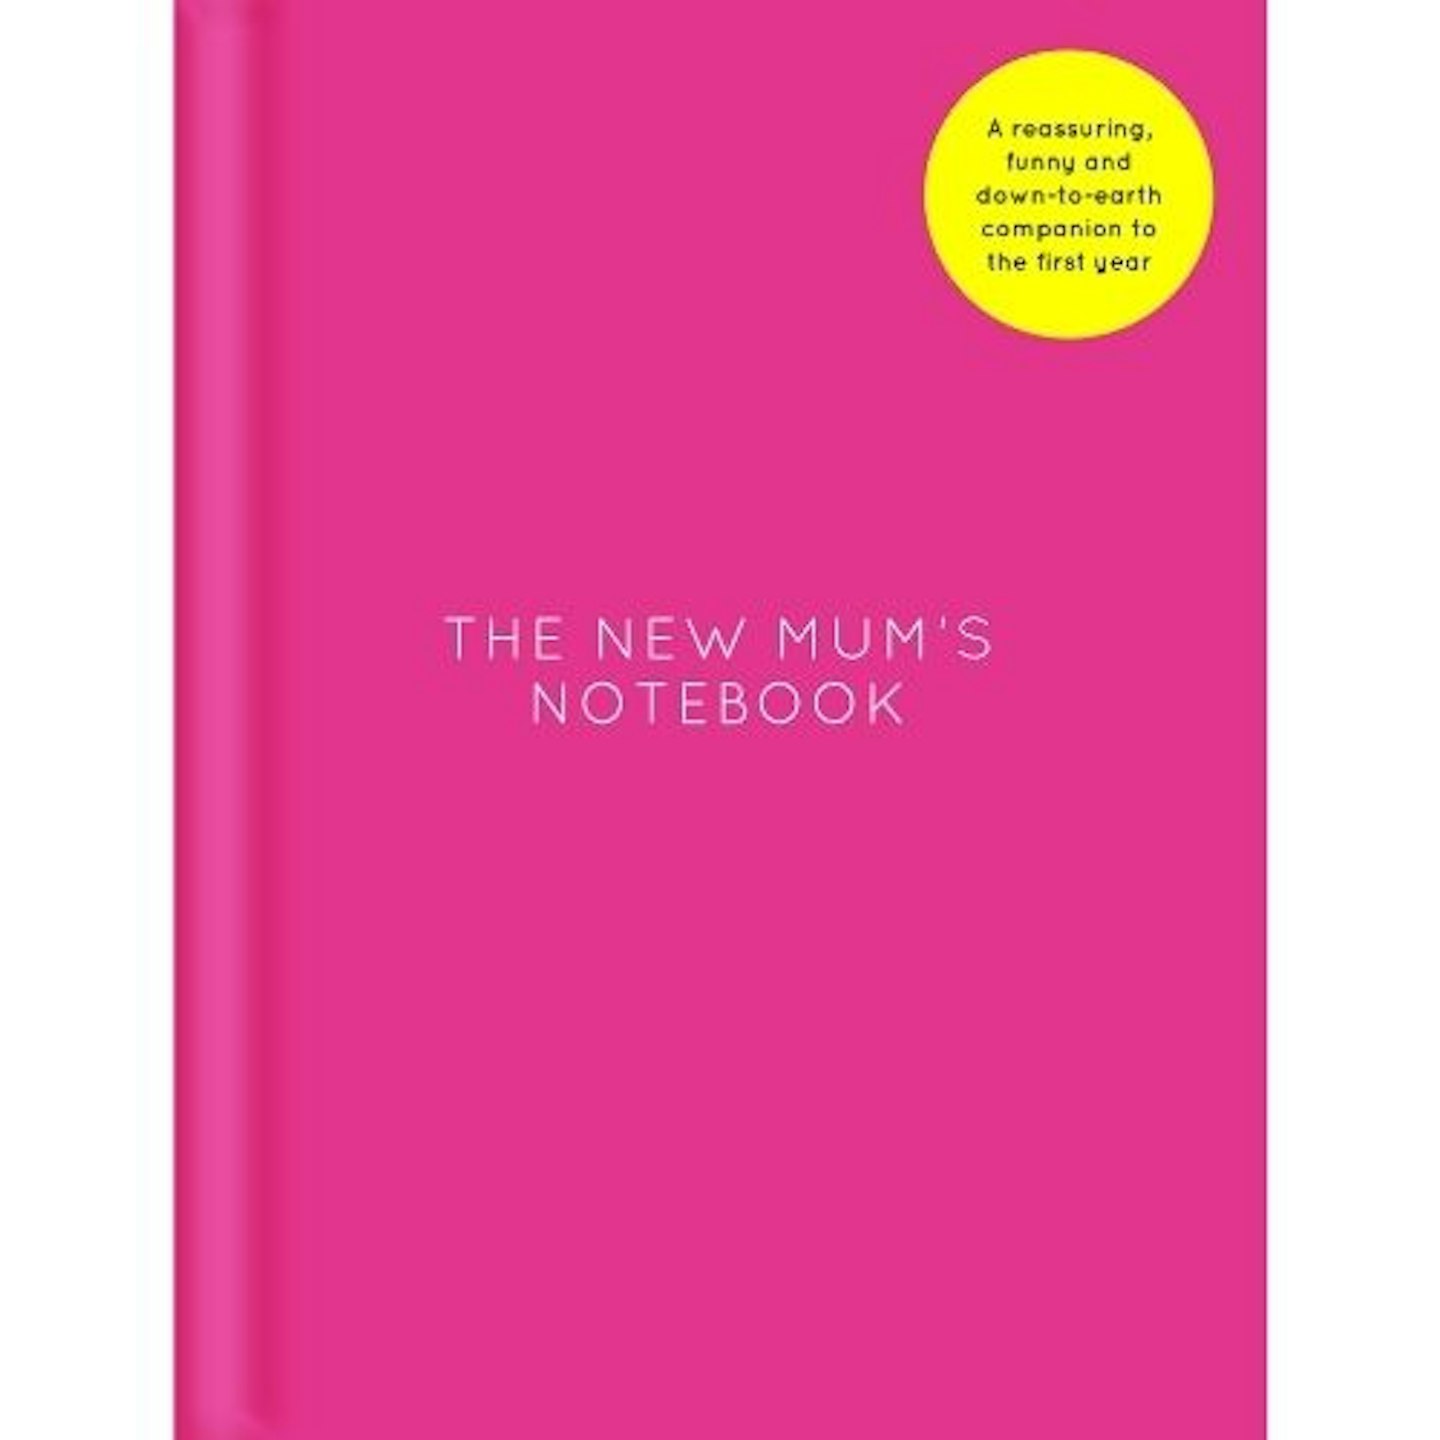 The New Mum's Notebook by Amy Ransom - Baby shower gift